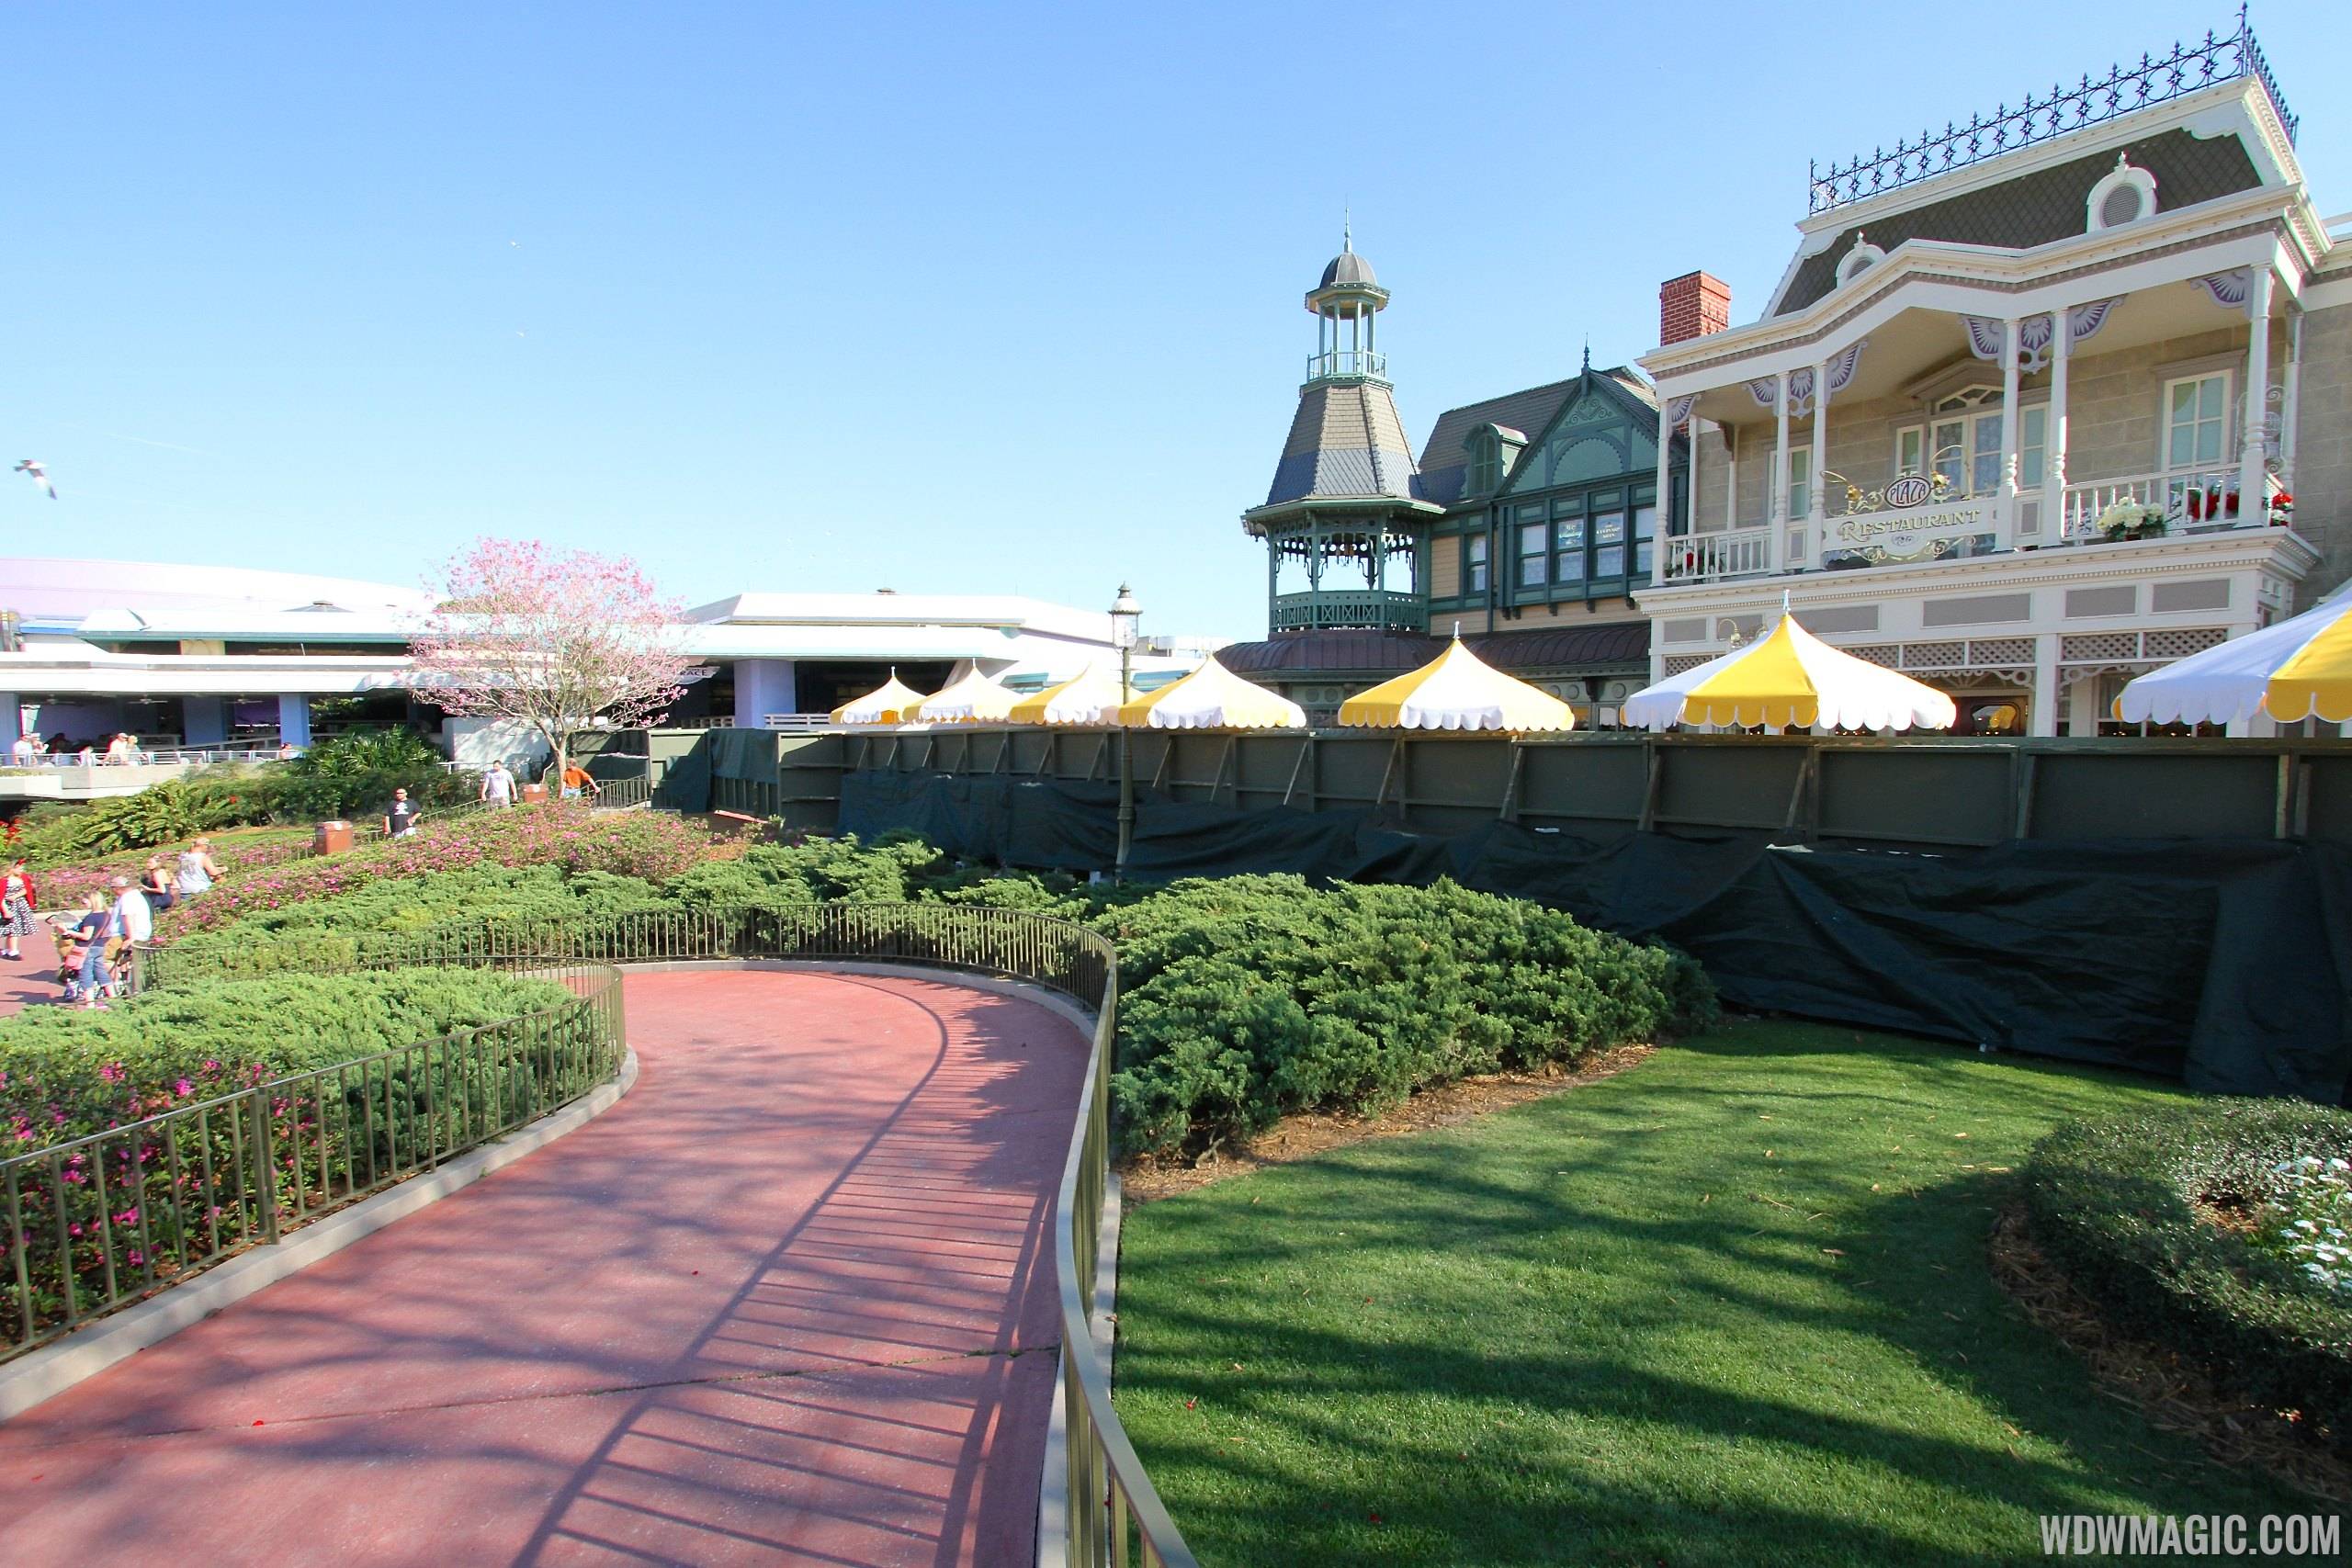 PHOTOS - Construction walls up around large sections of the hub at the Magic Kingdom